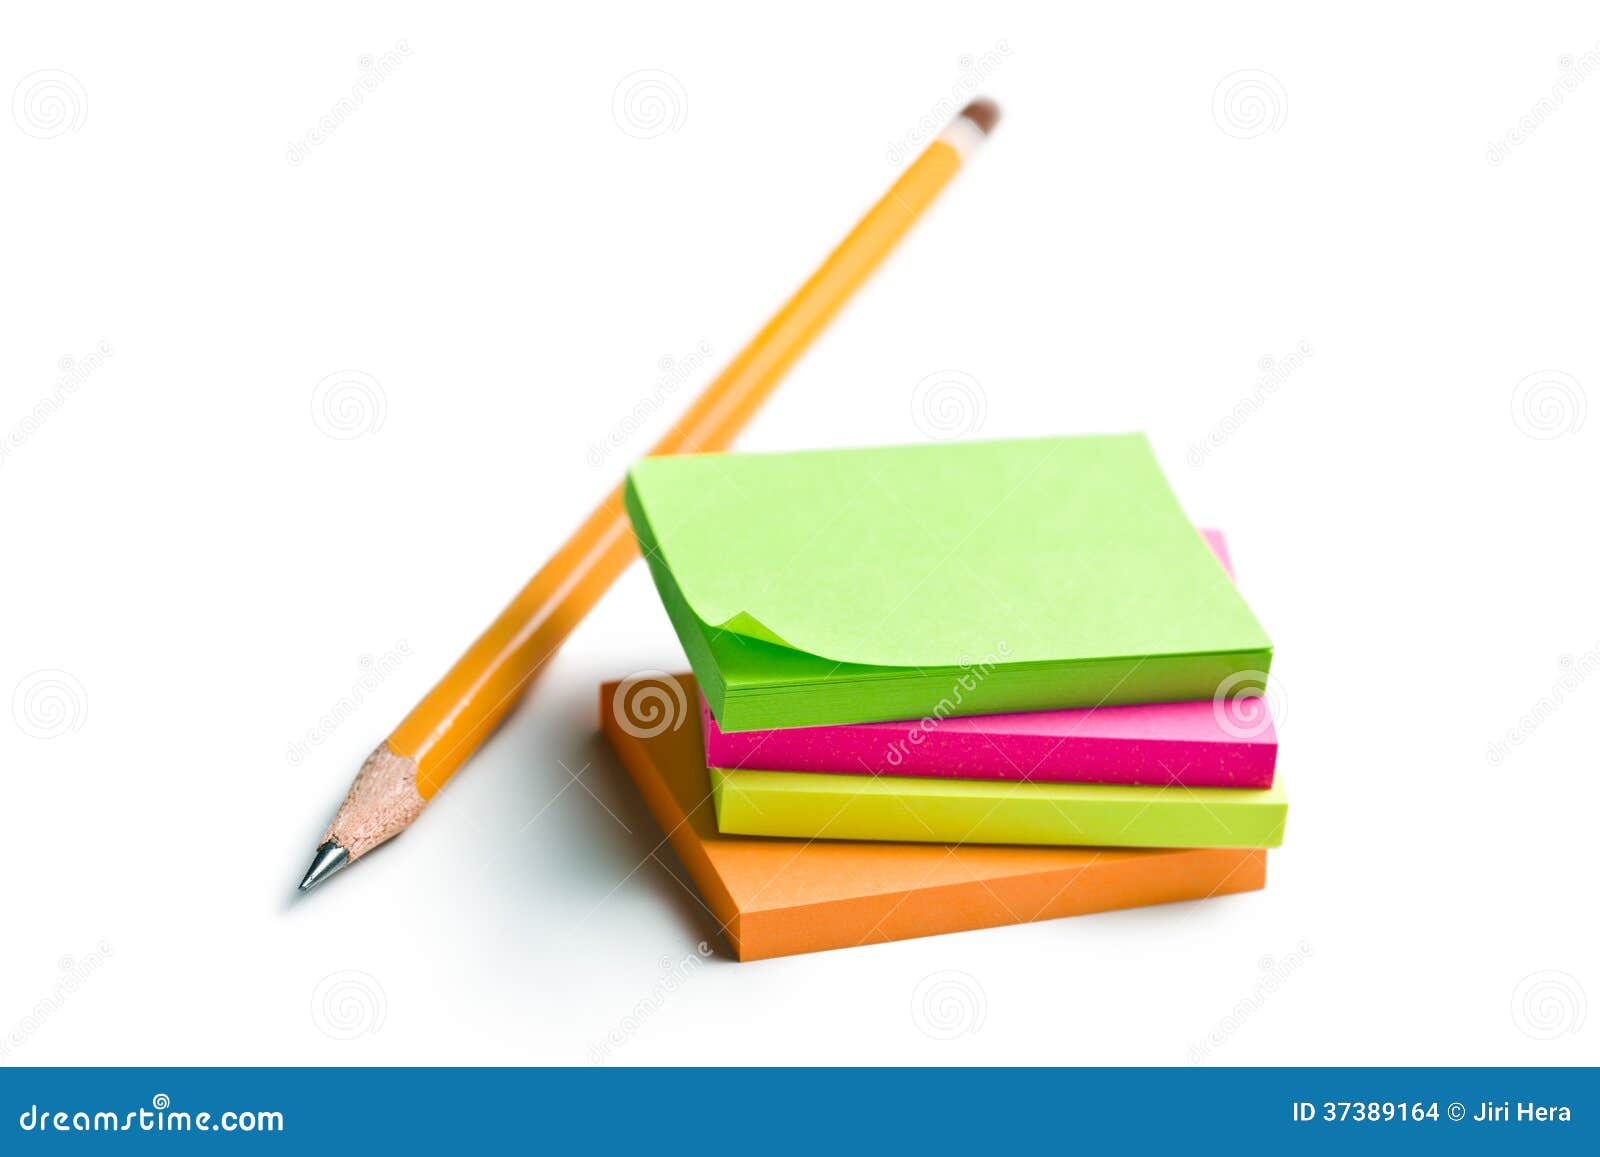 sticky-notes-pencil-white-background-373